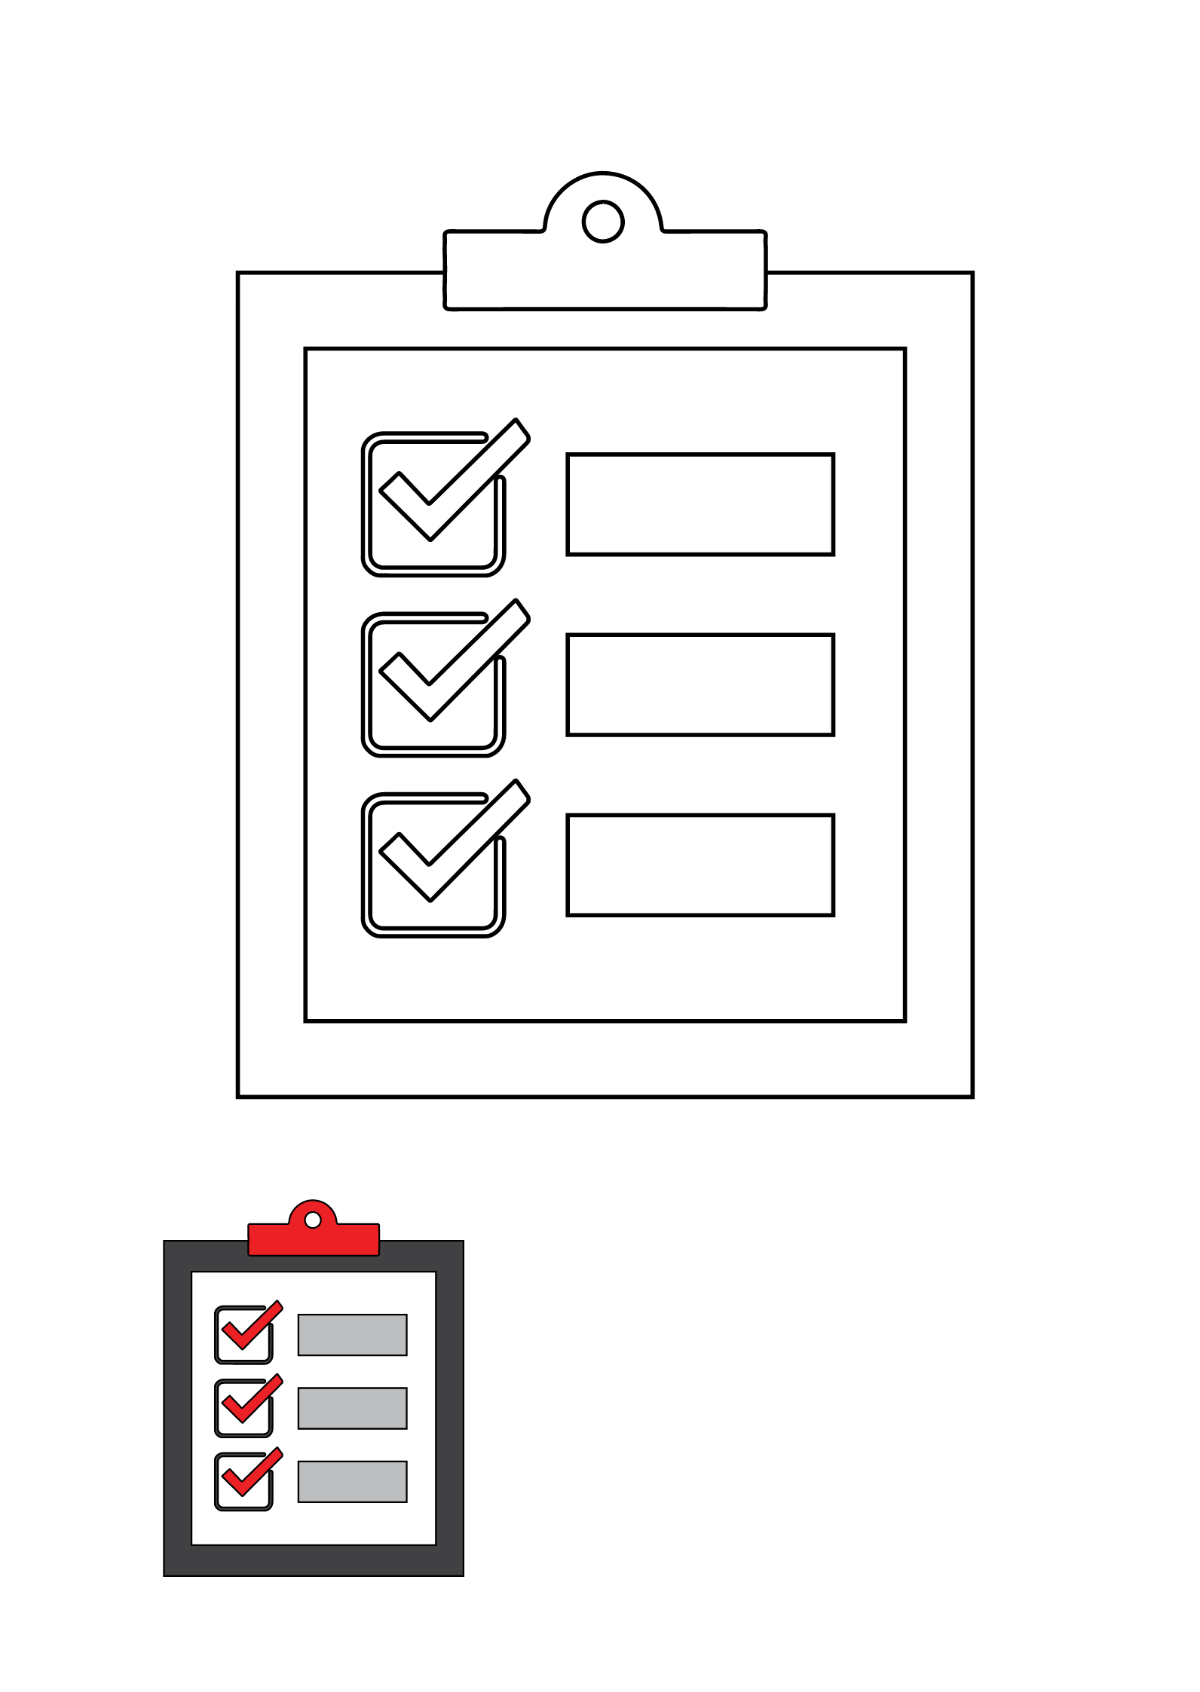 Complete Check Mark coloring page Template